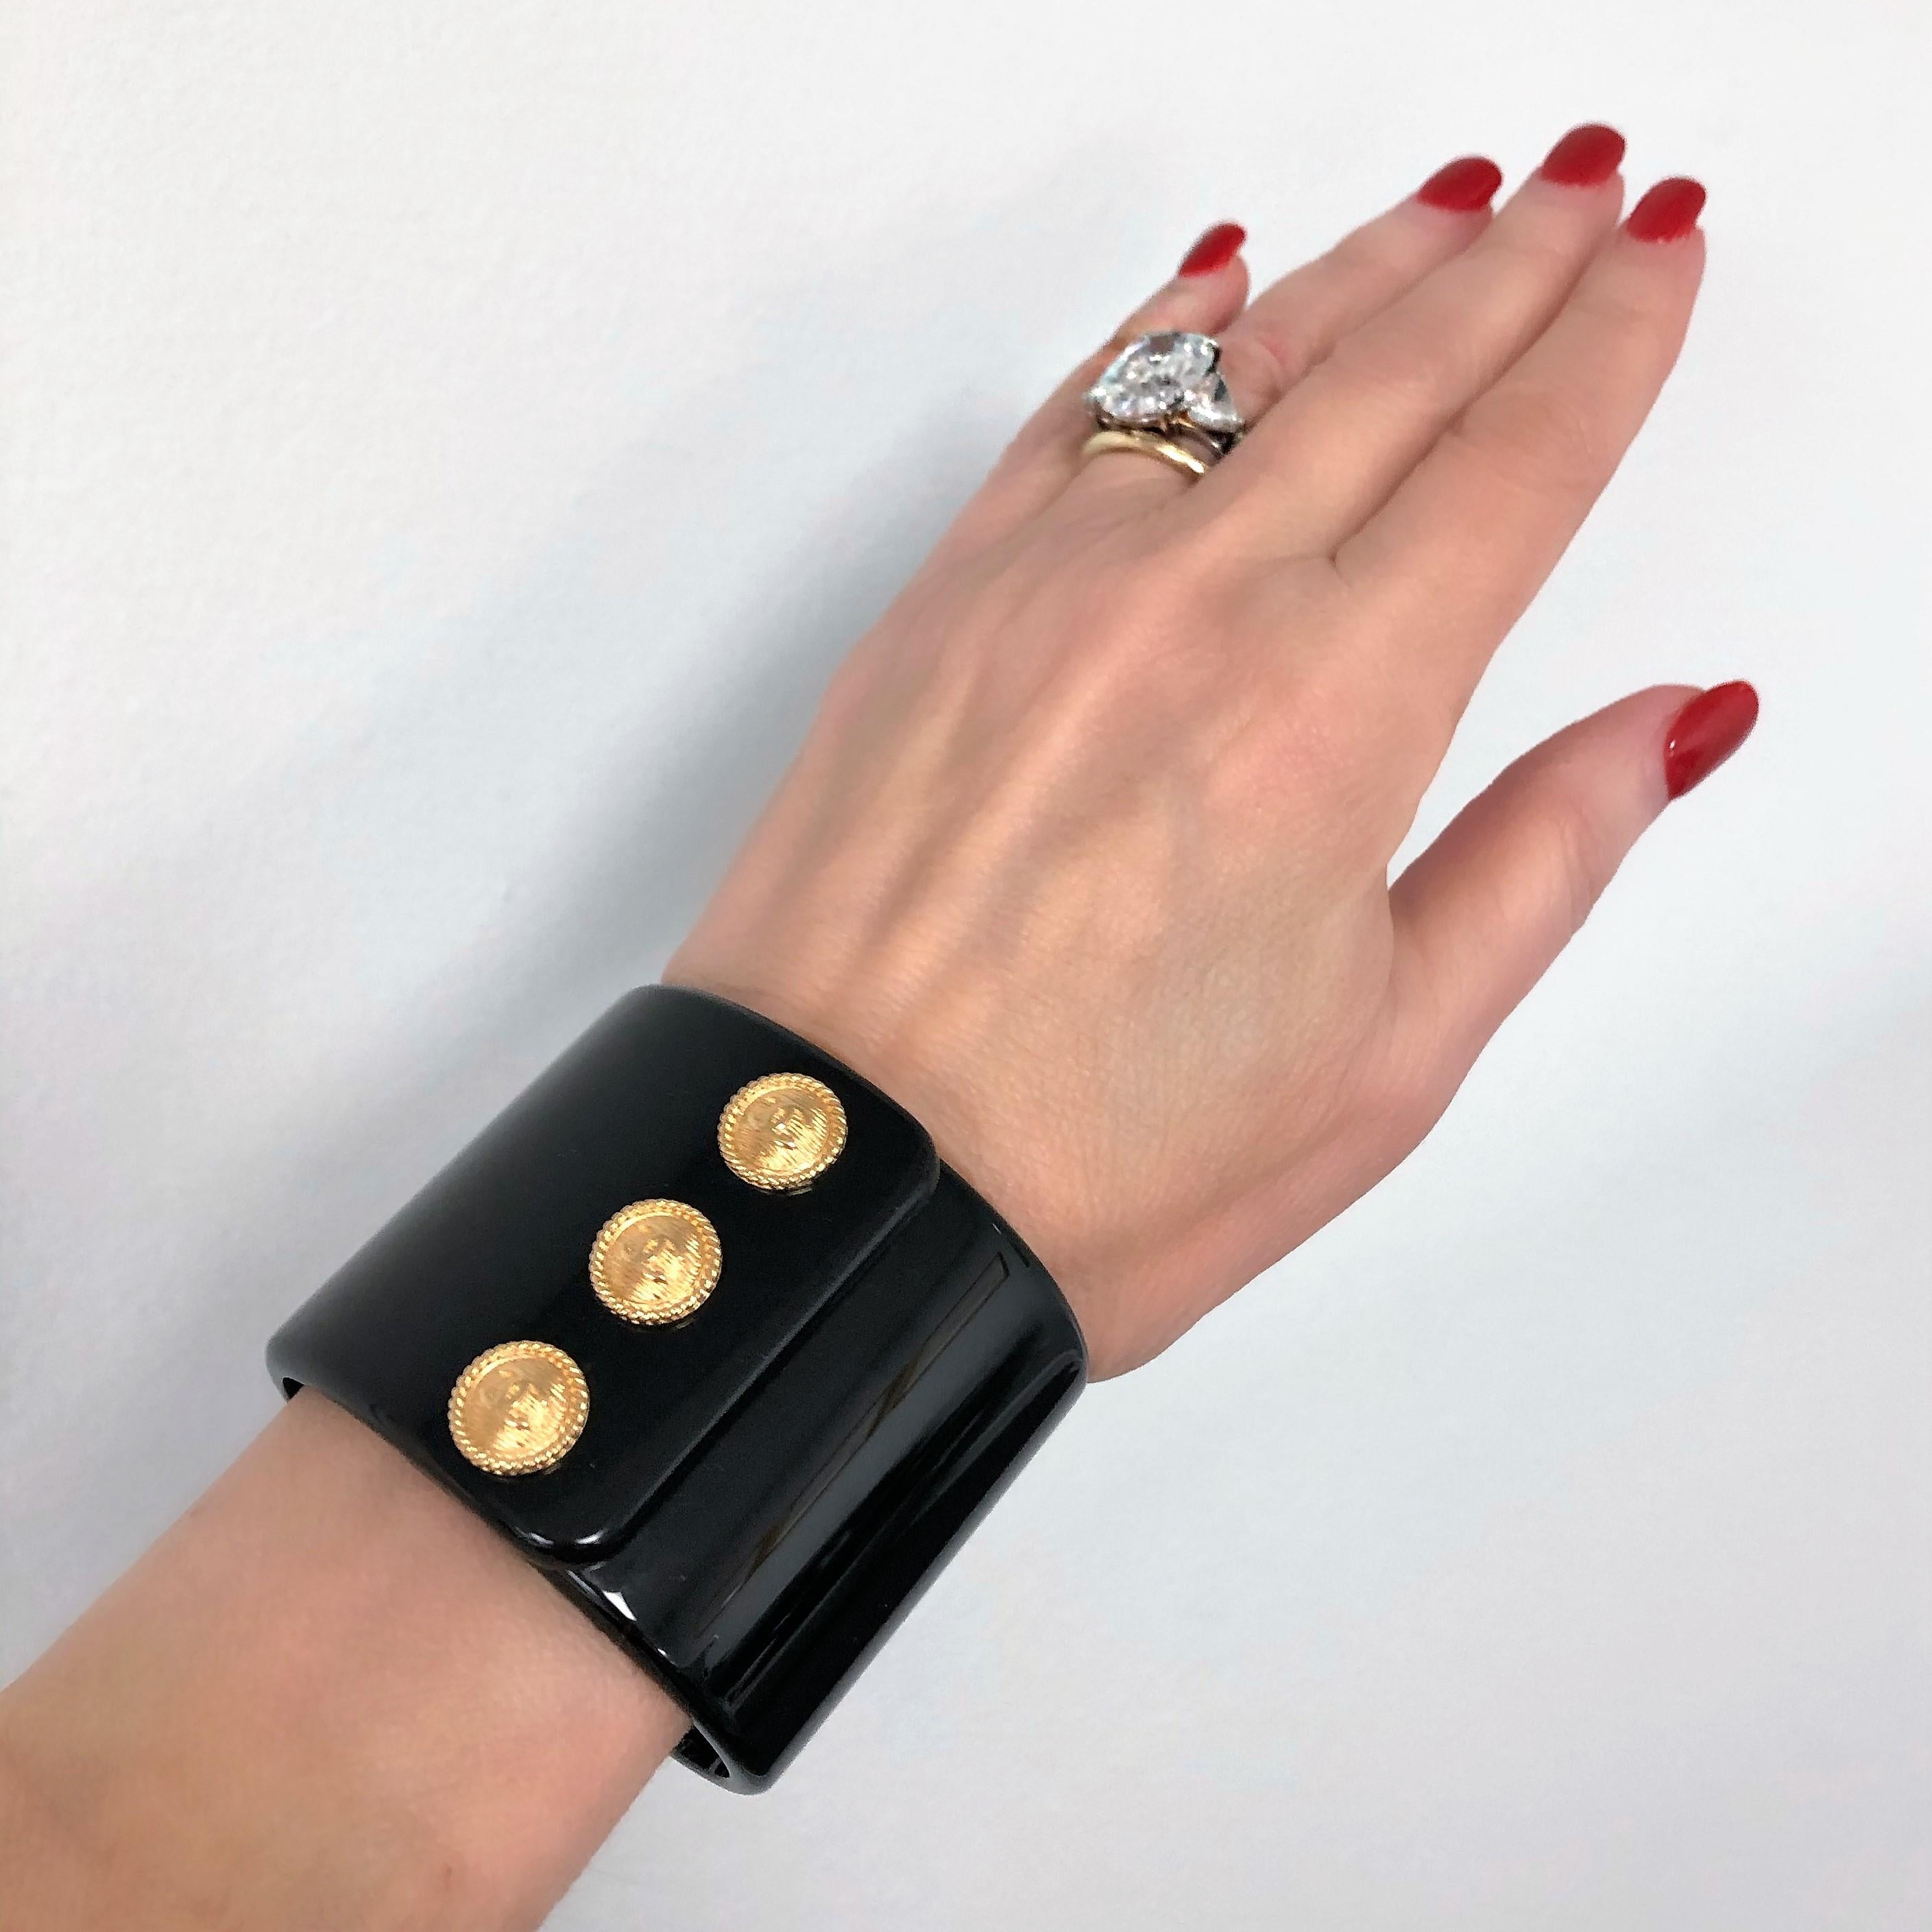 Chanel Black Resin 3 Button Cuff Bracelet 2018 Fall Collection For Sale 6